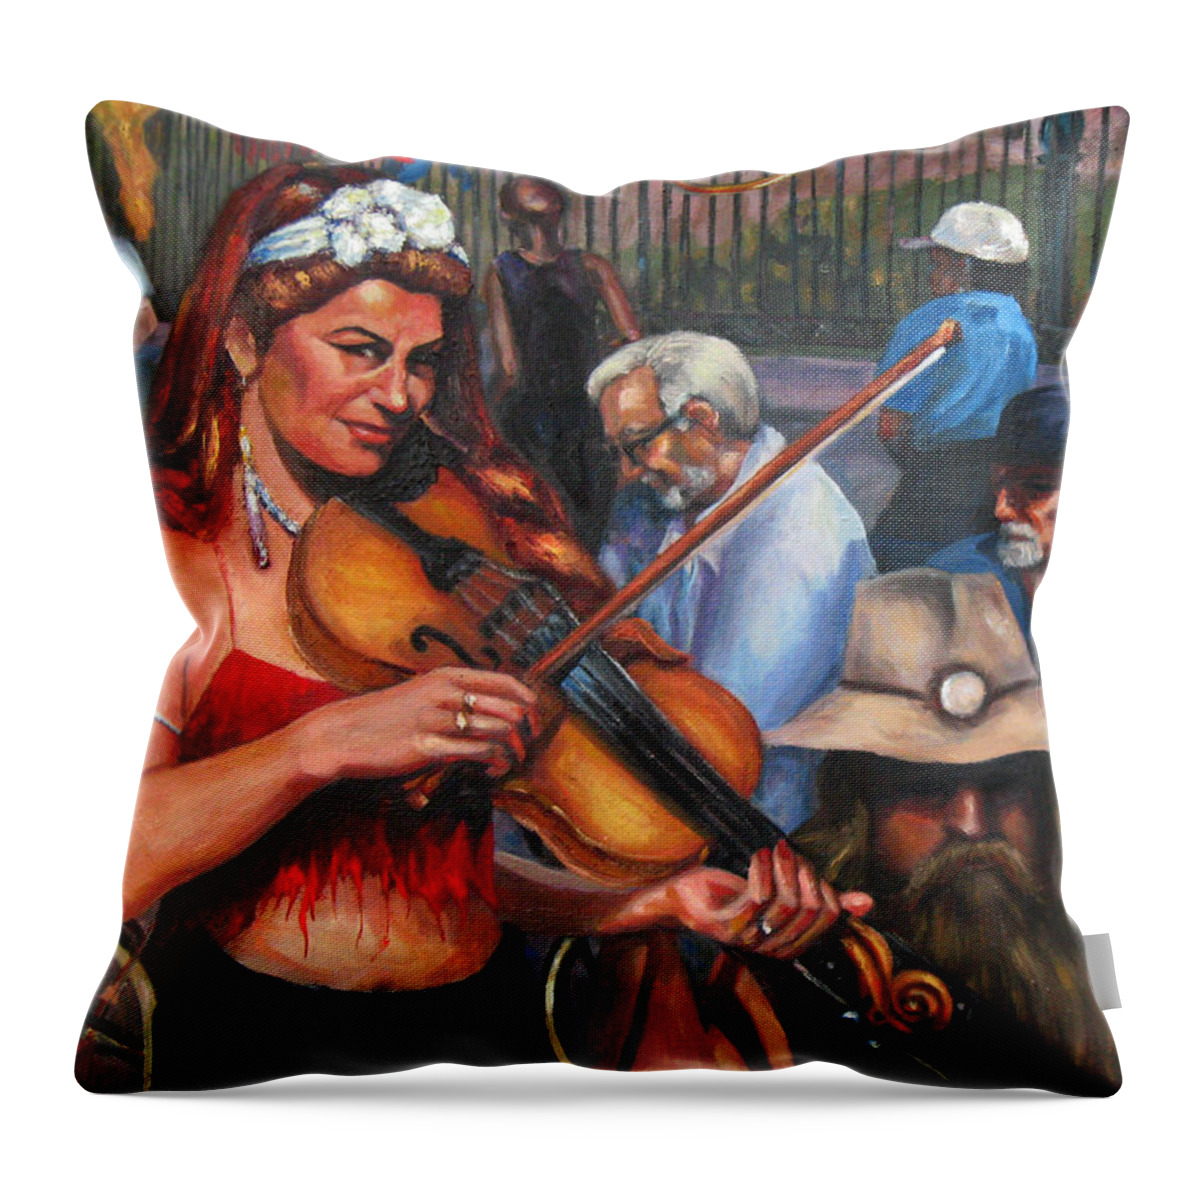 New Orleans Throw Pillow featuring the painting Washboard Lissa on Fiddle by Beverly Boulet